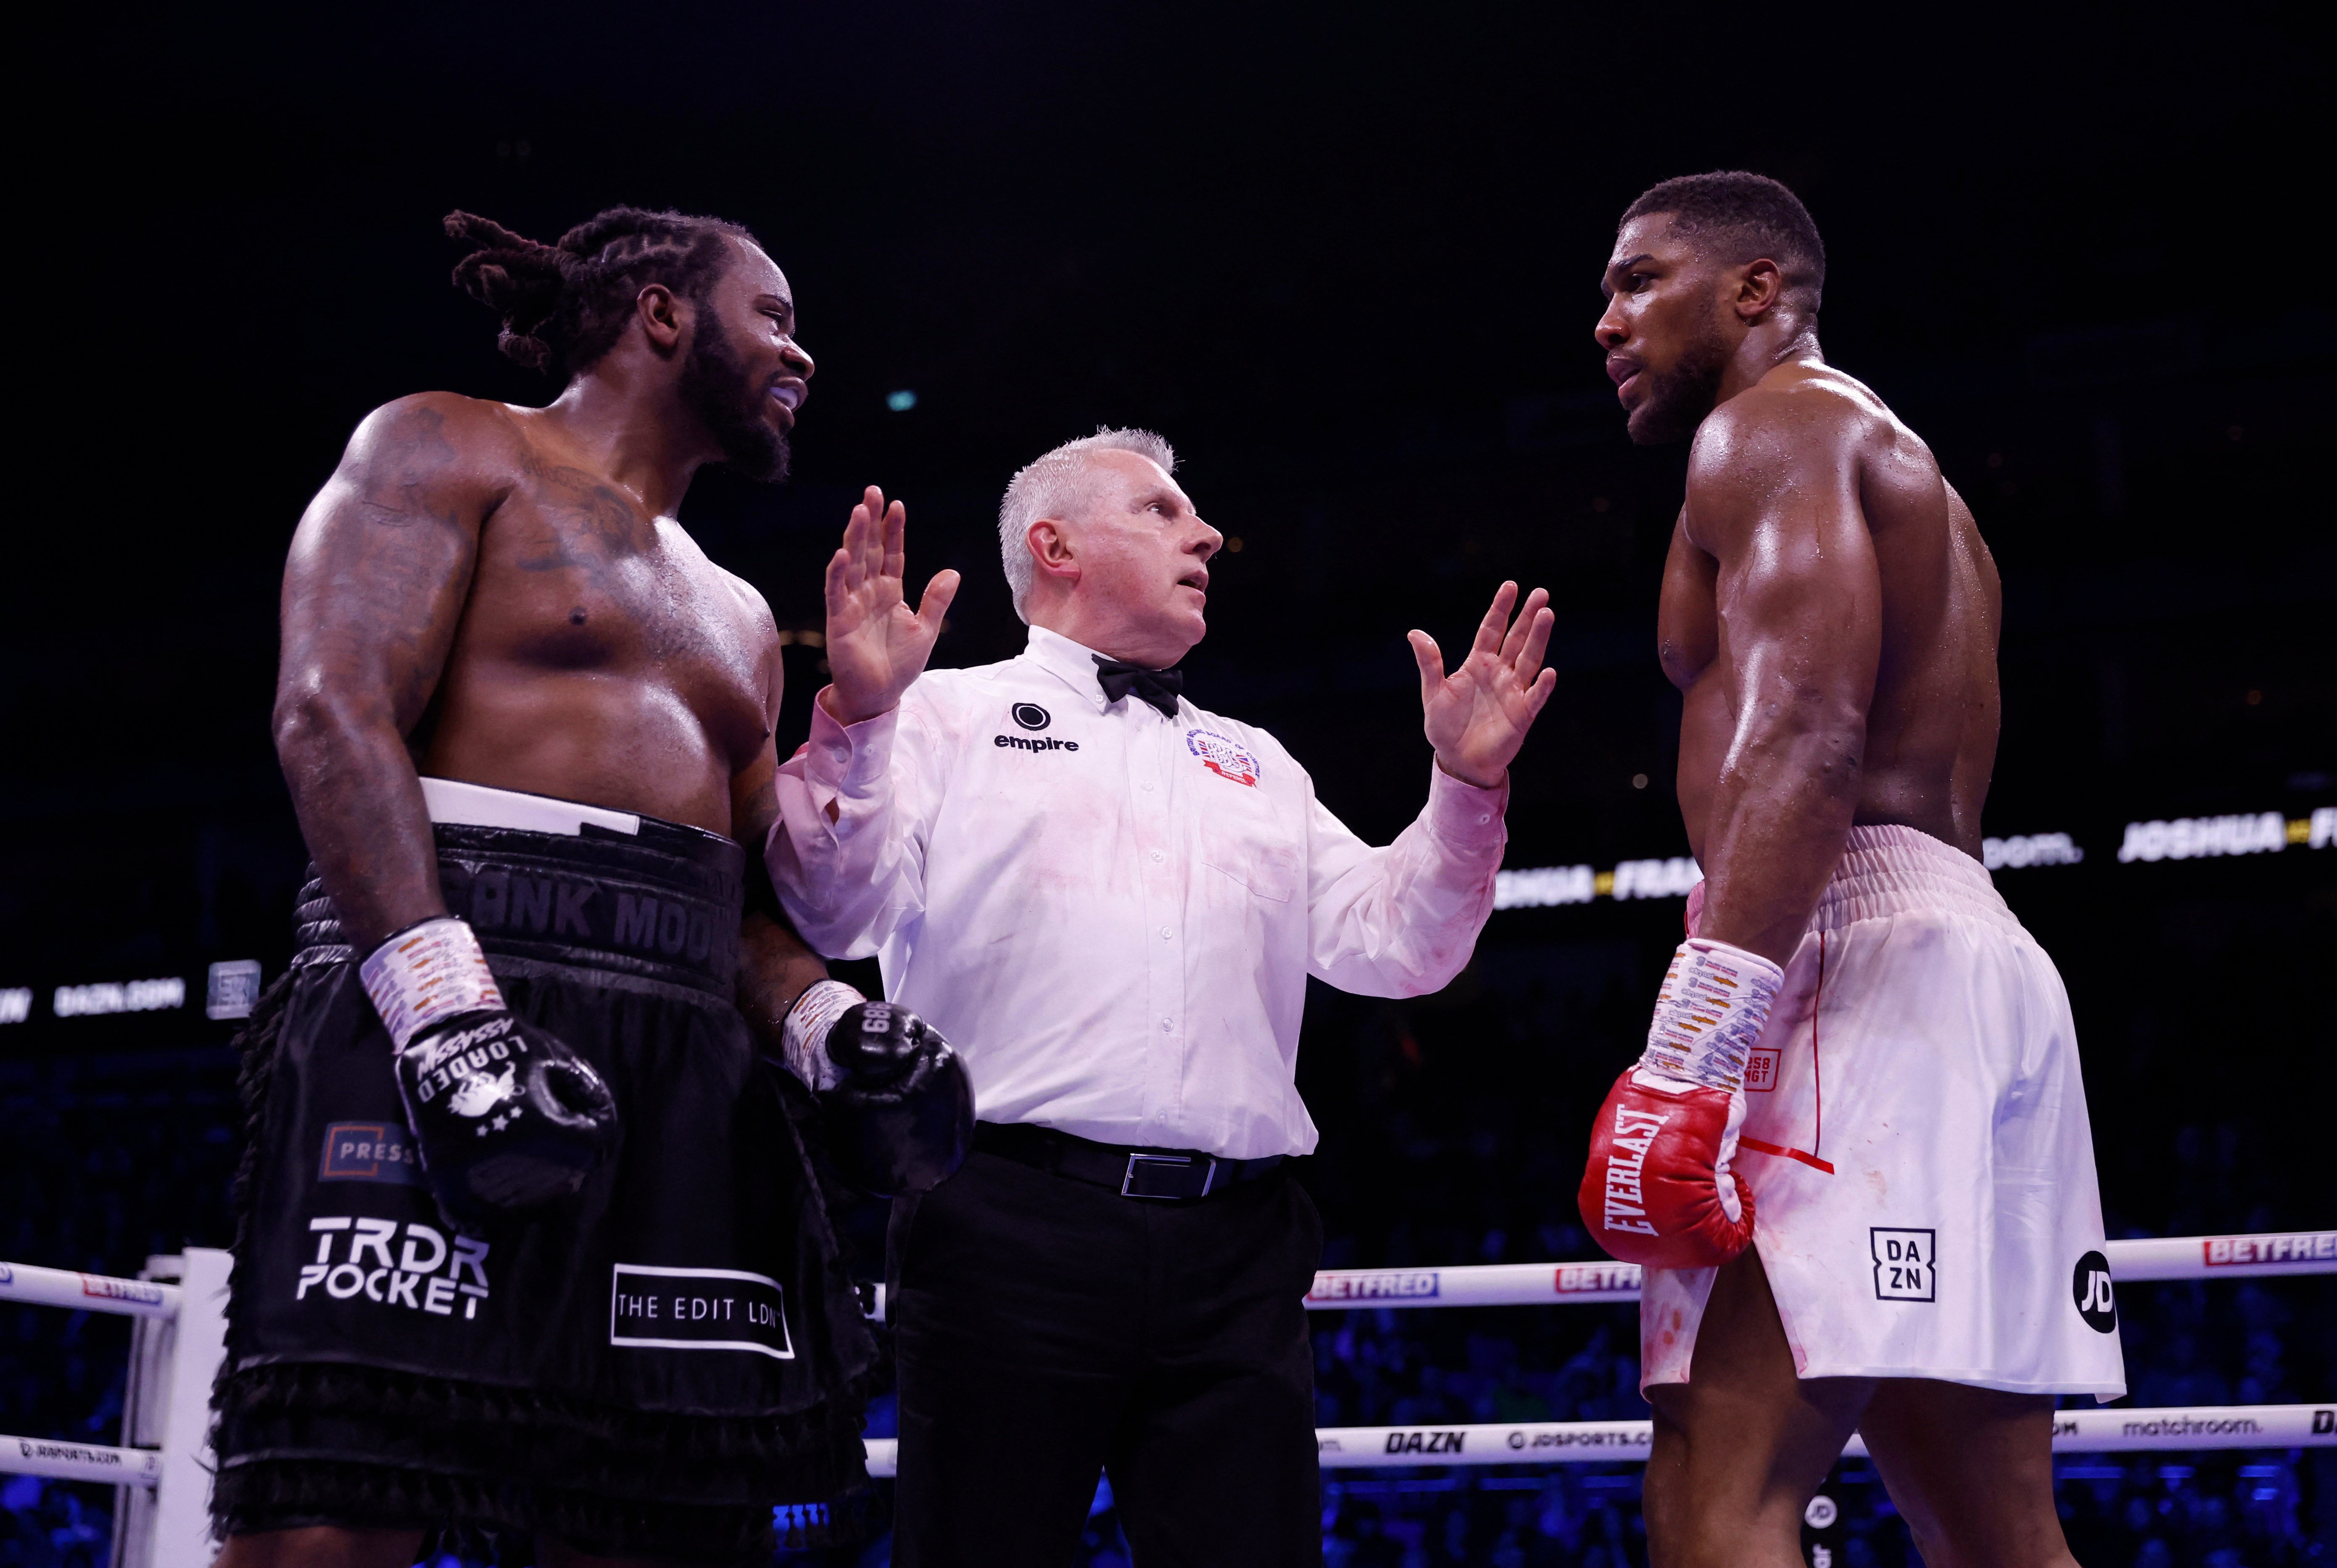 Anthony Joshua vs Jermaine Franklin LIVE Did AJ win? The Independent